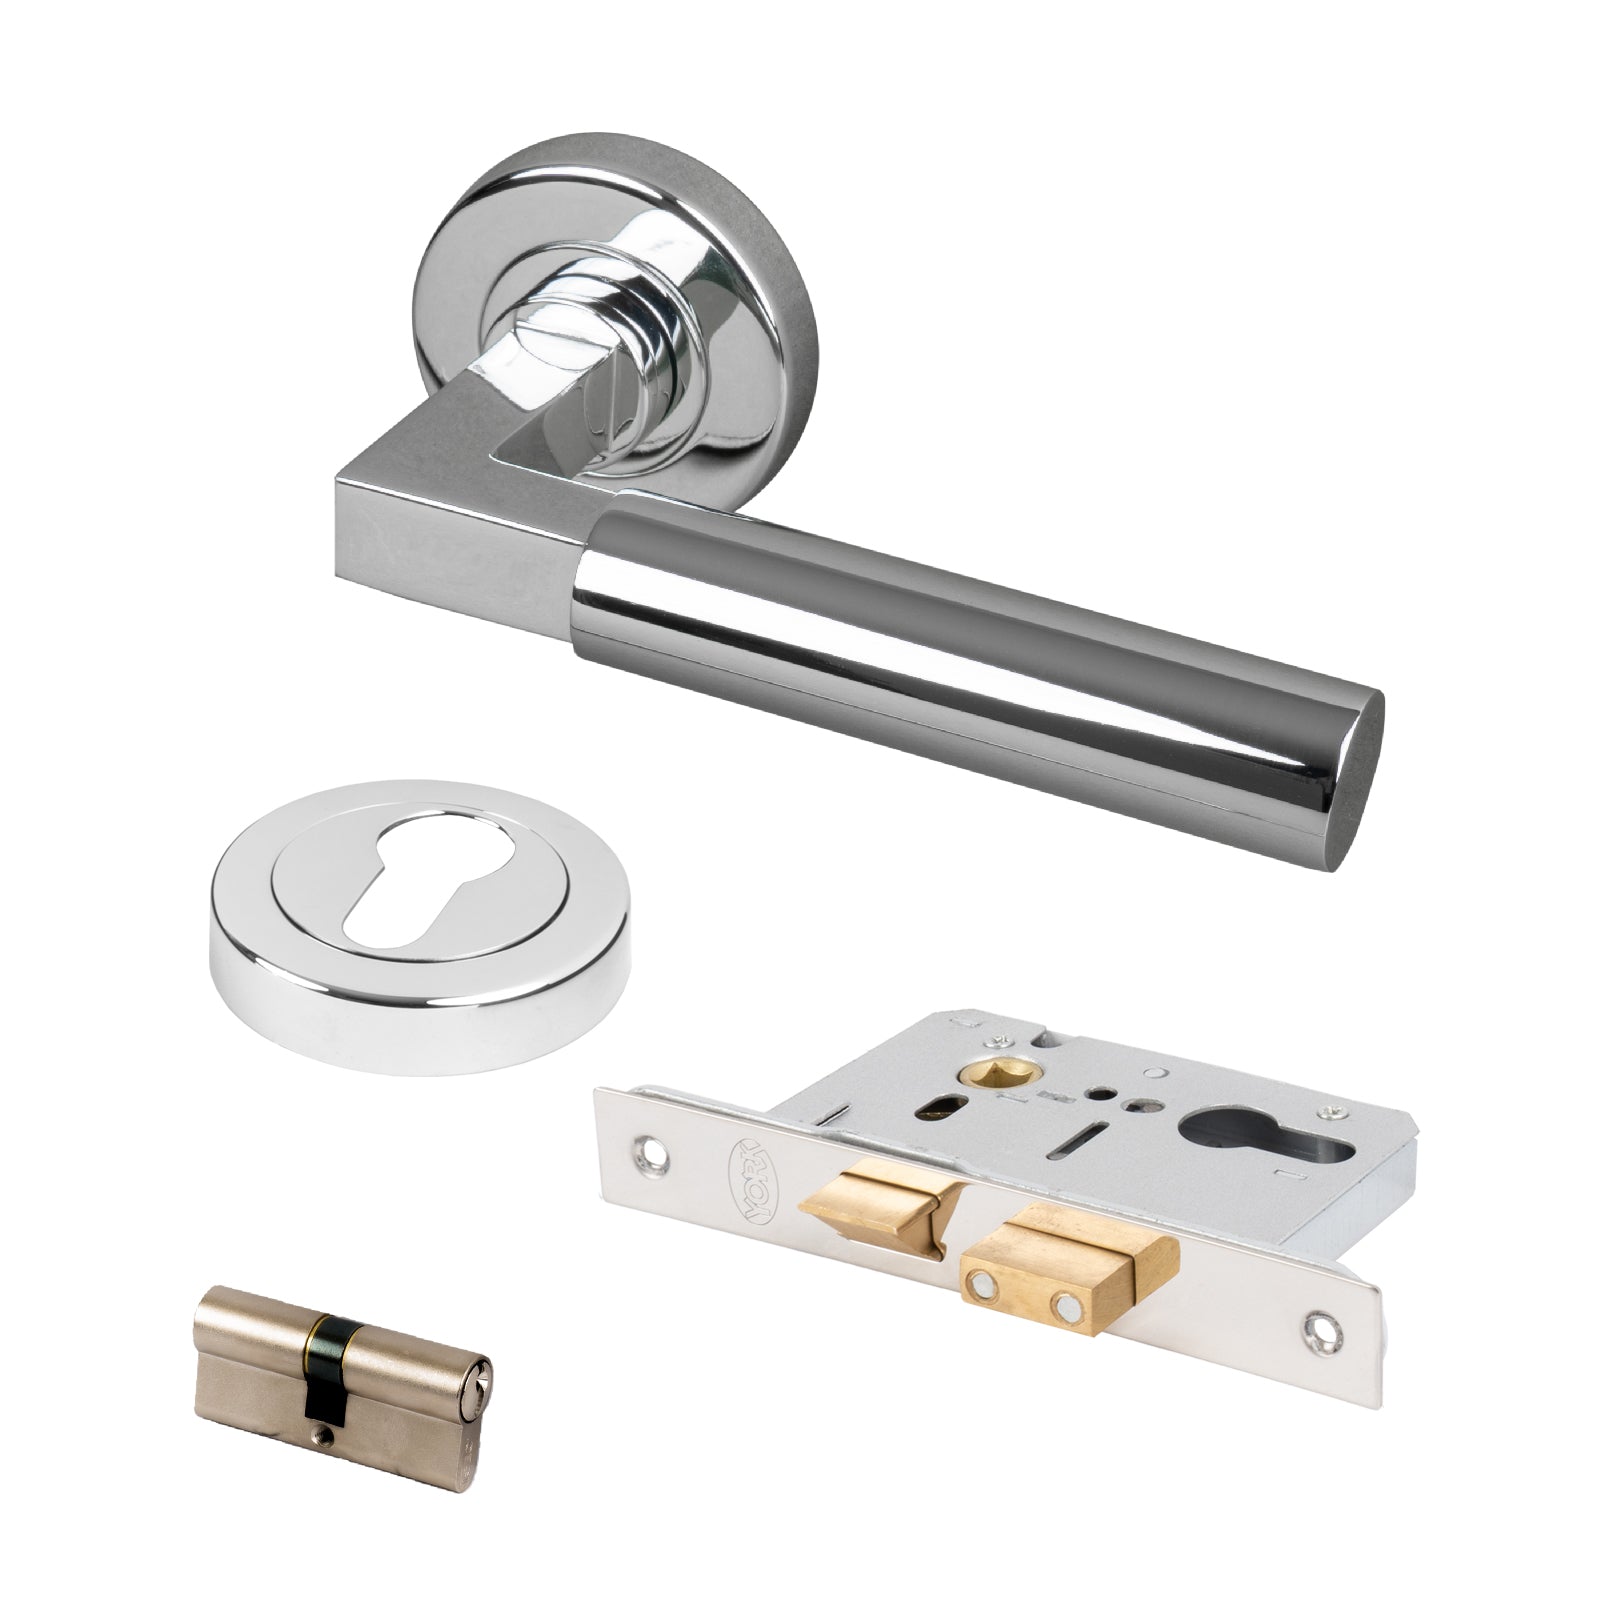 chrome Bauhaus round rose handles with Euro profile lock and keyhole covers